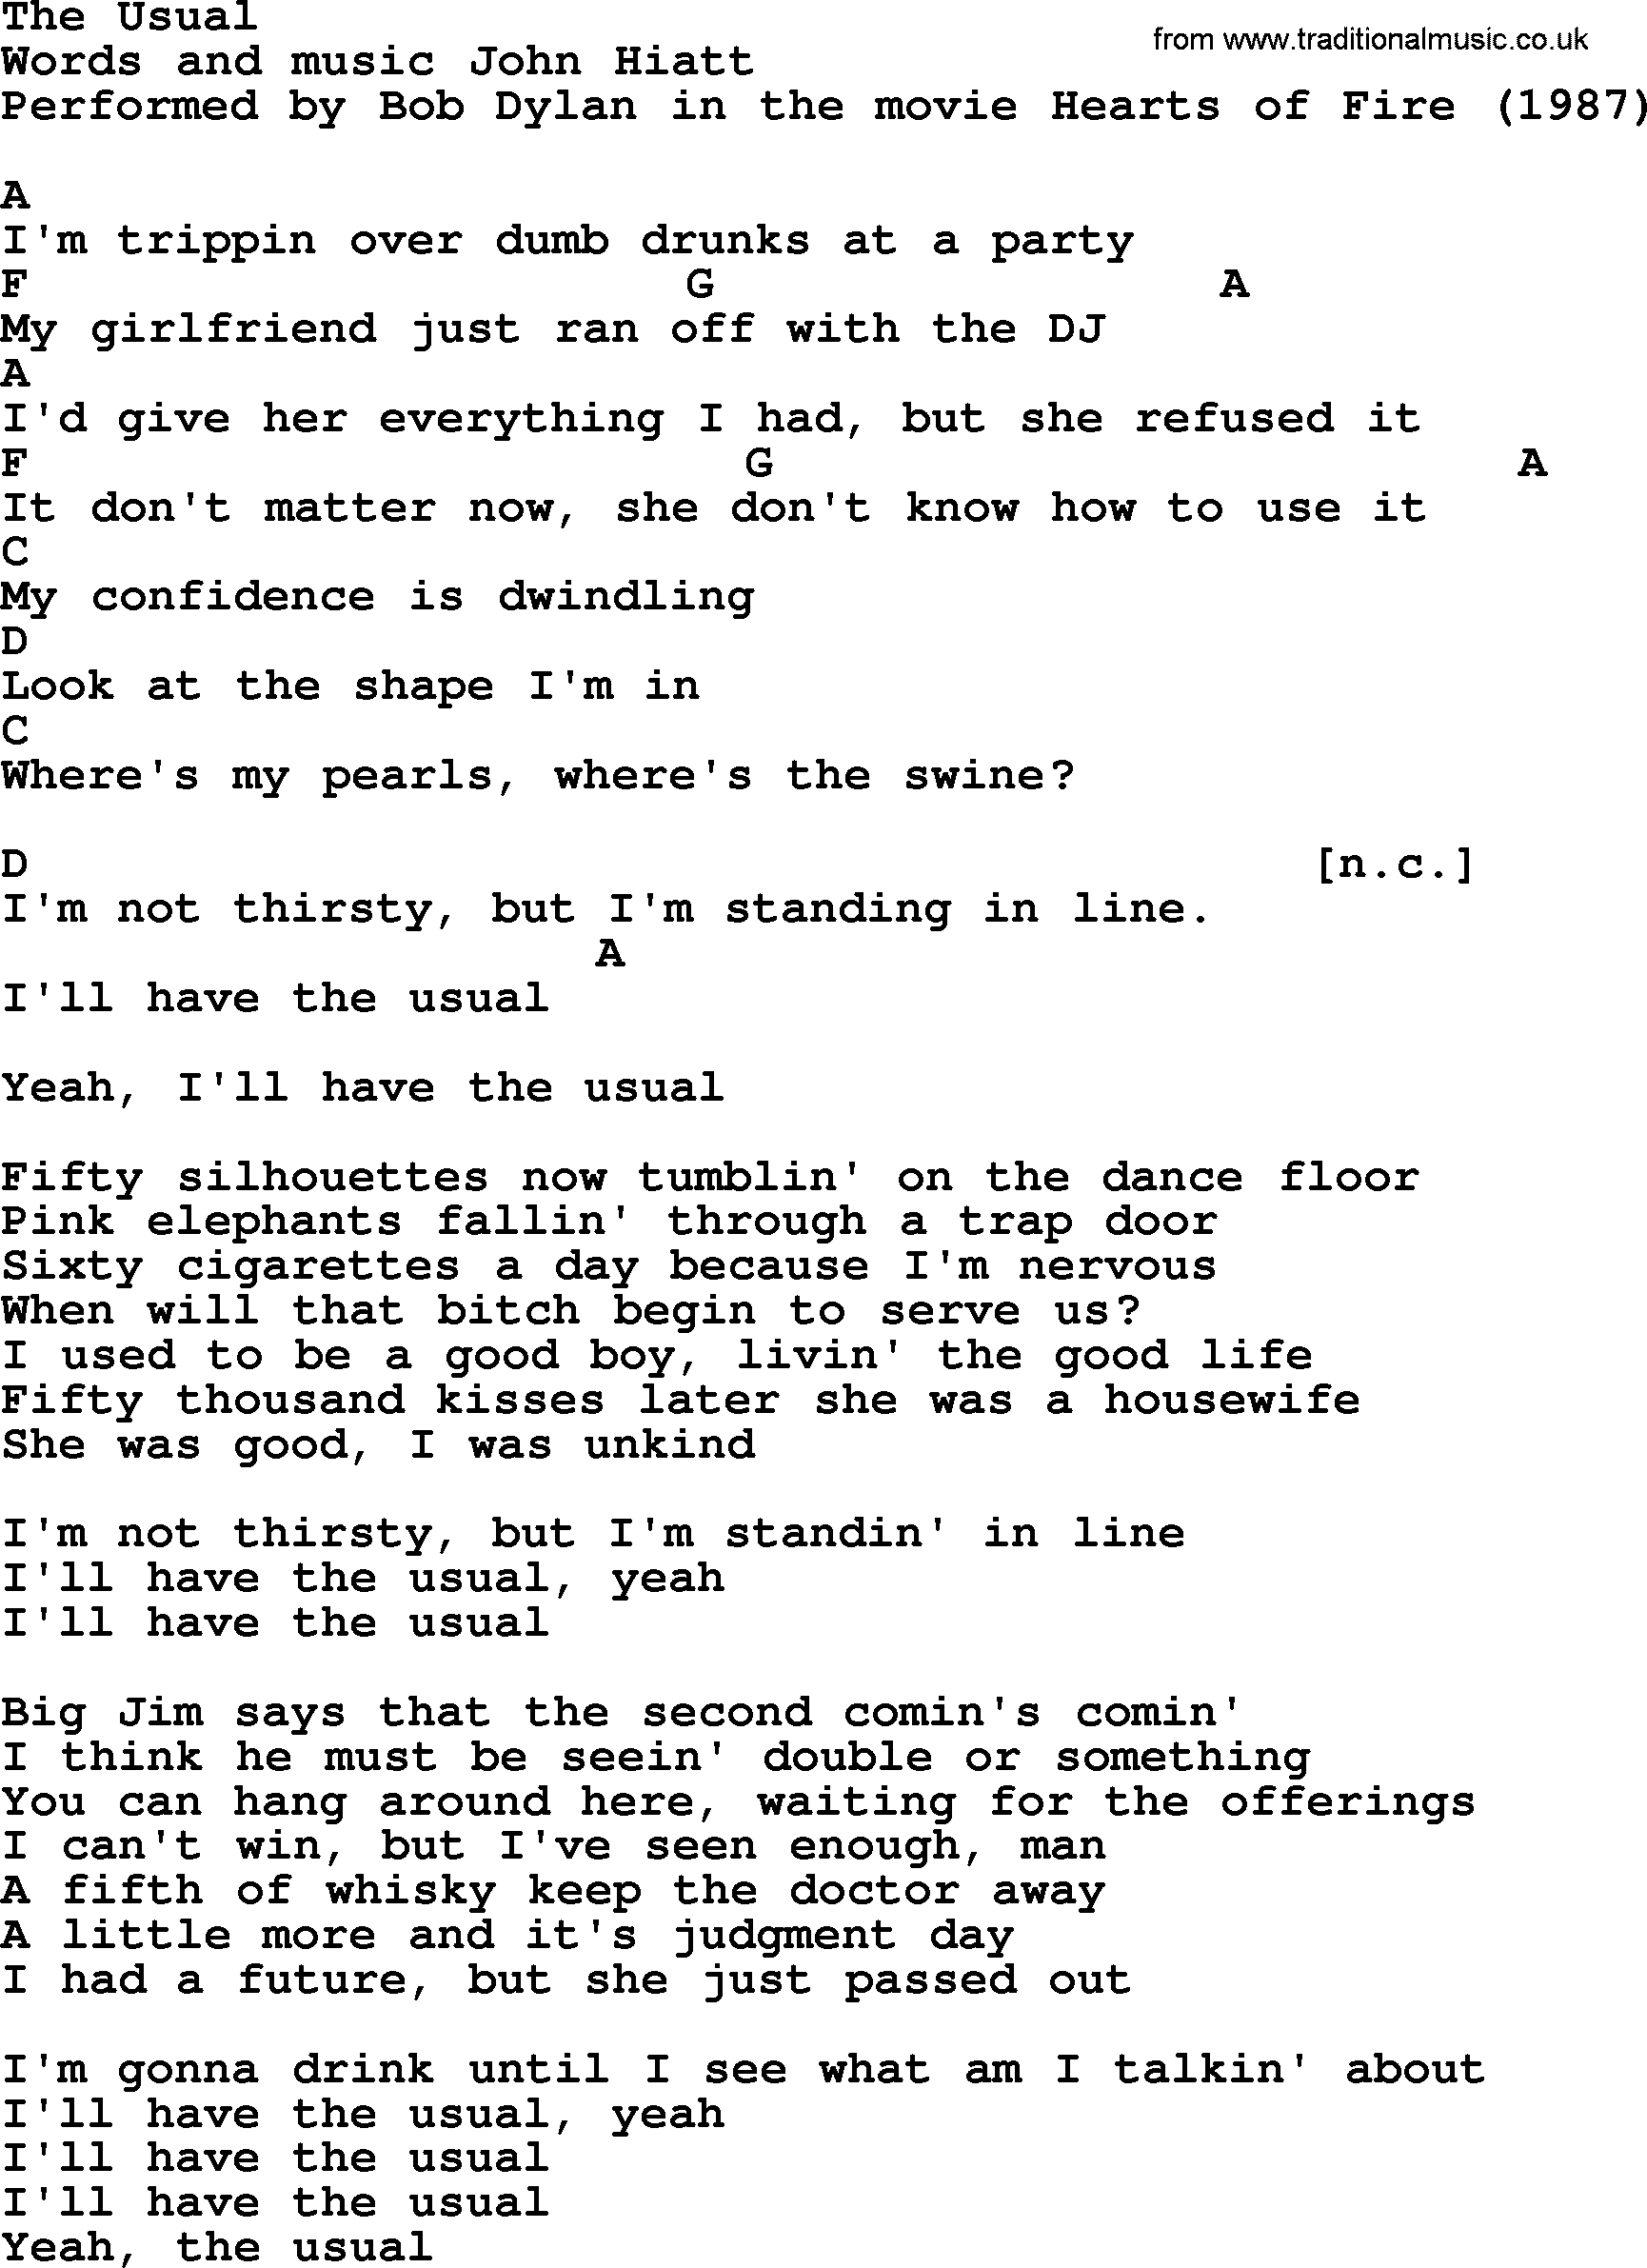 Bob Dylan song, lyrics with chords - The Usual